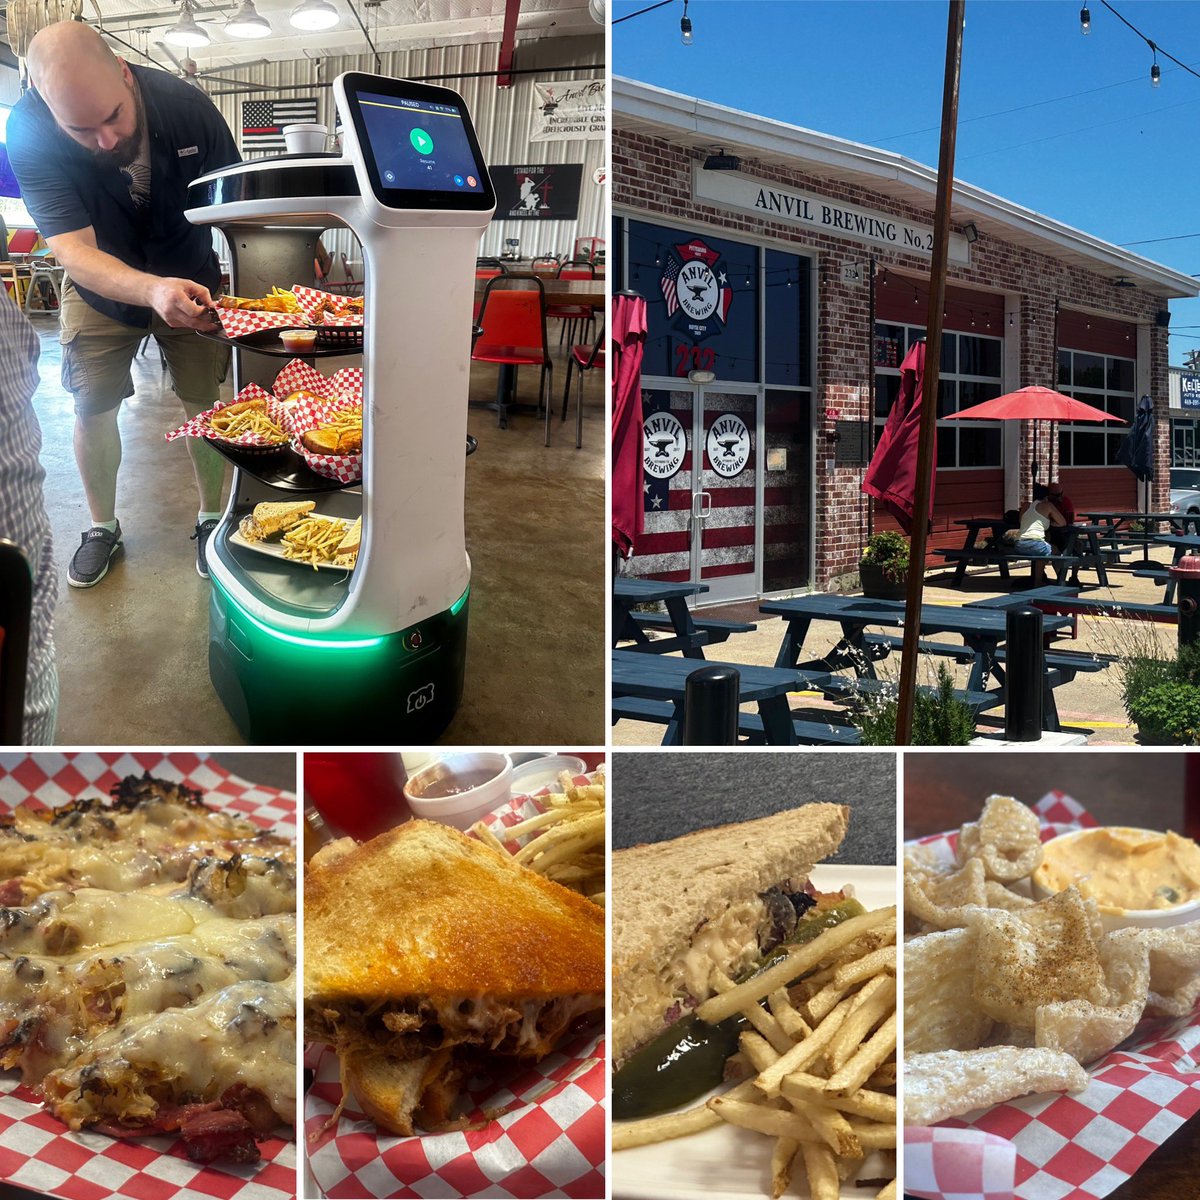 #whatsforlunch today?
We all went into town, Royce City, for lunch at Anvil Brewing No. 2! A Fireman’s bar, in honor of J!🚒🧯
This place was AMAZING!
From the local brews 🍺 to the amazing unique food & great service! 
A great last day Adventure! 🤠